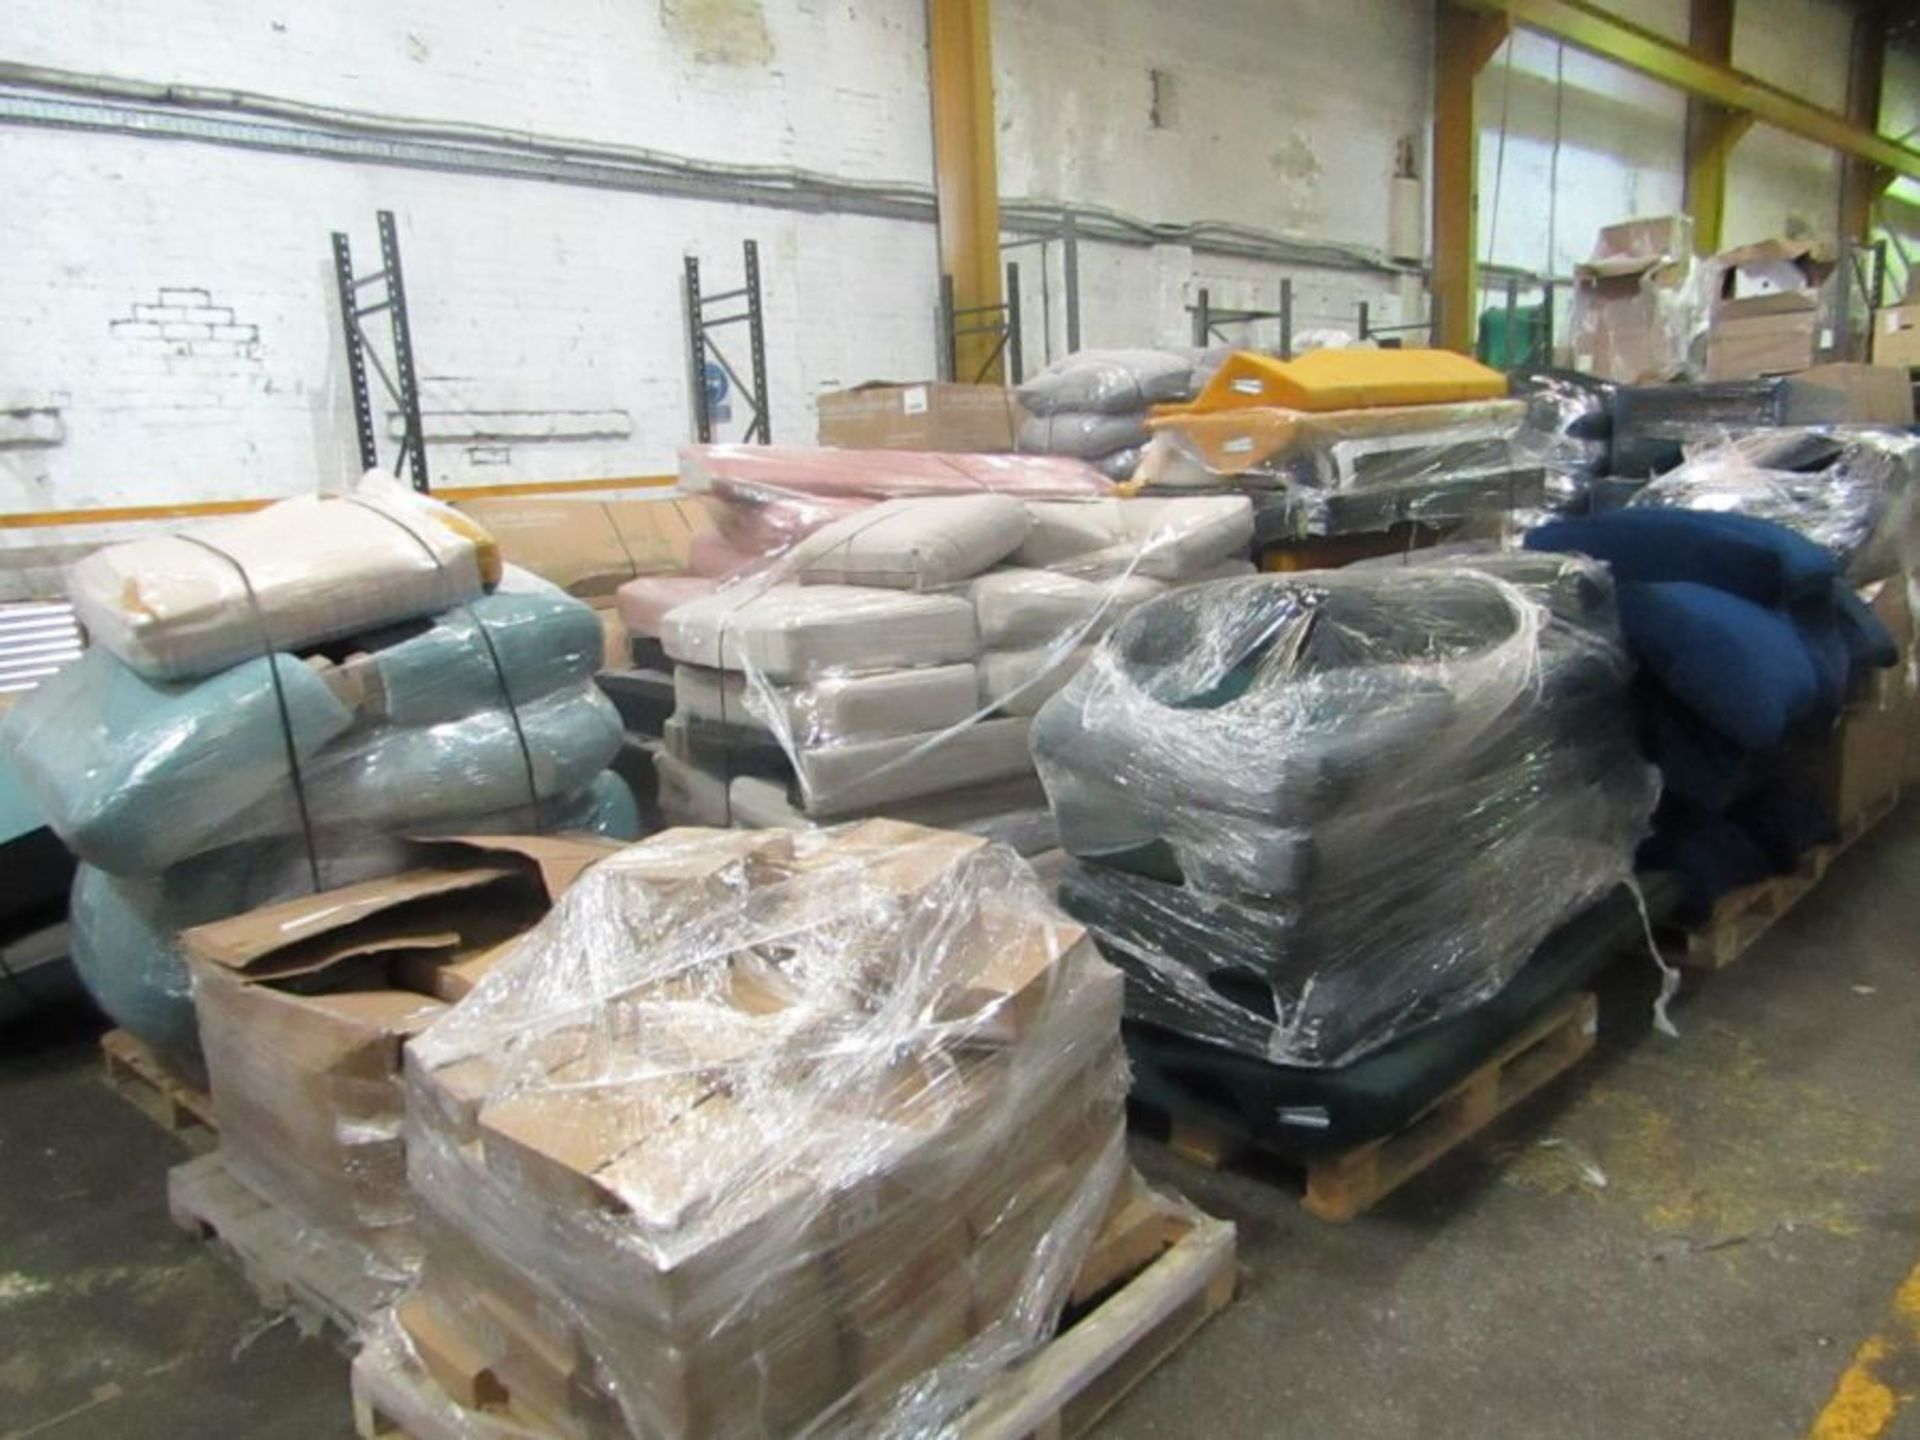 0% Buyers Premium, 24 Pallets of Genuine SNUG SOFA parts - Mixed Lots of Bases Backs Arms Cushions